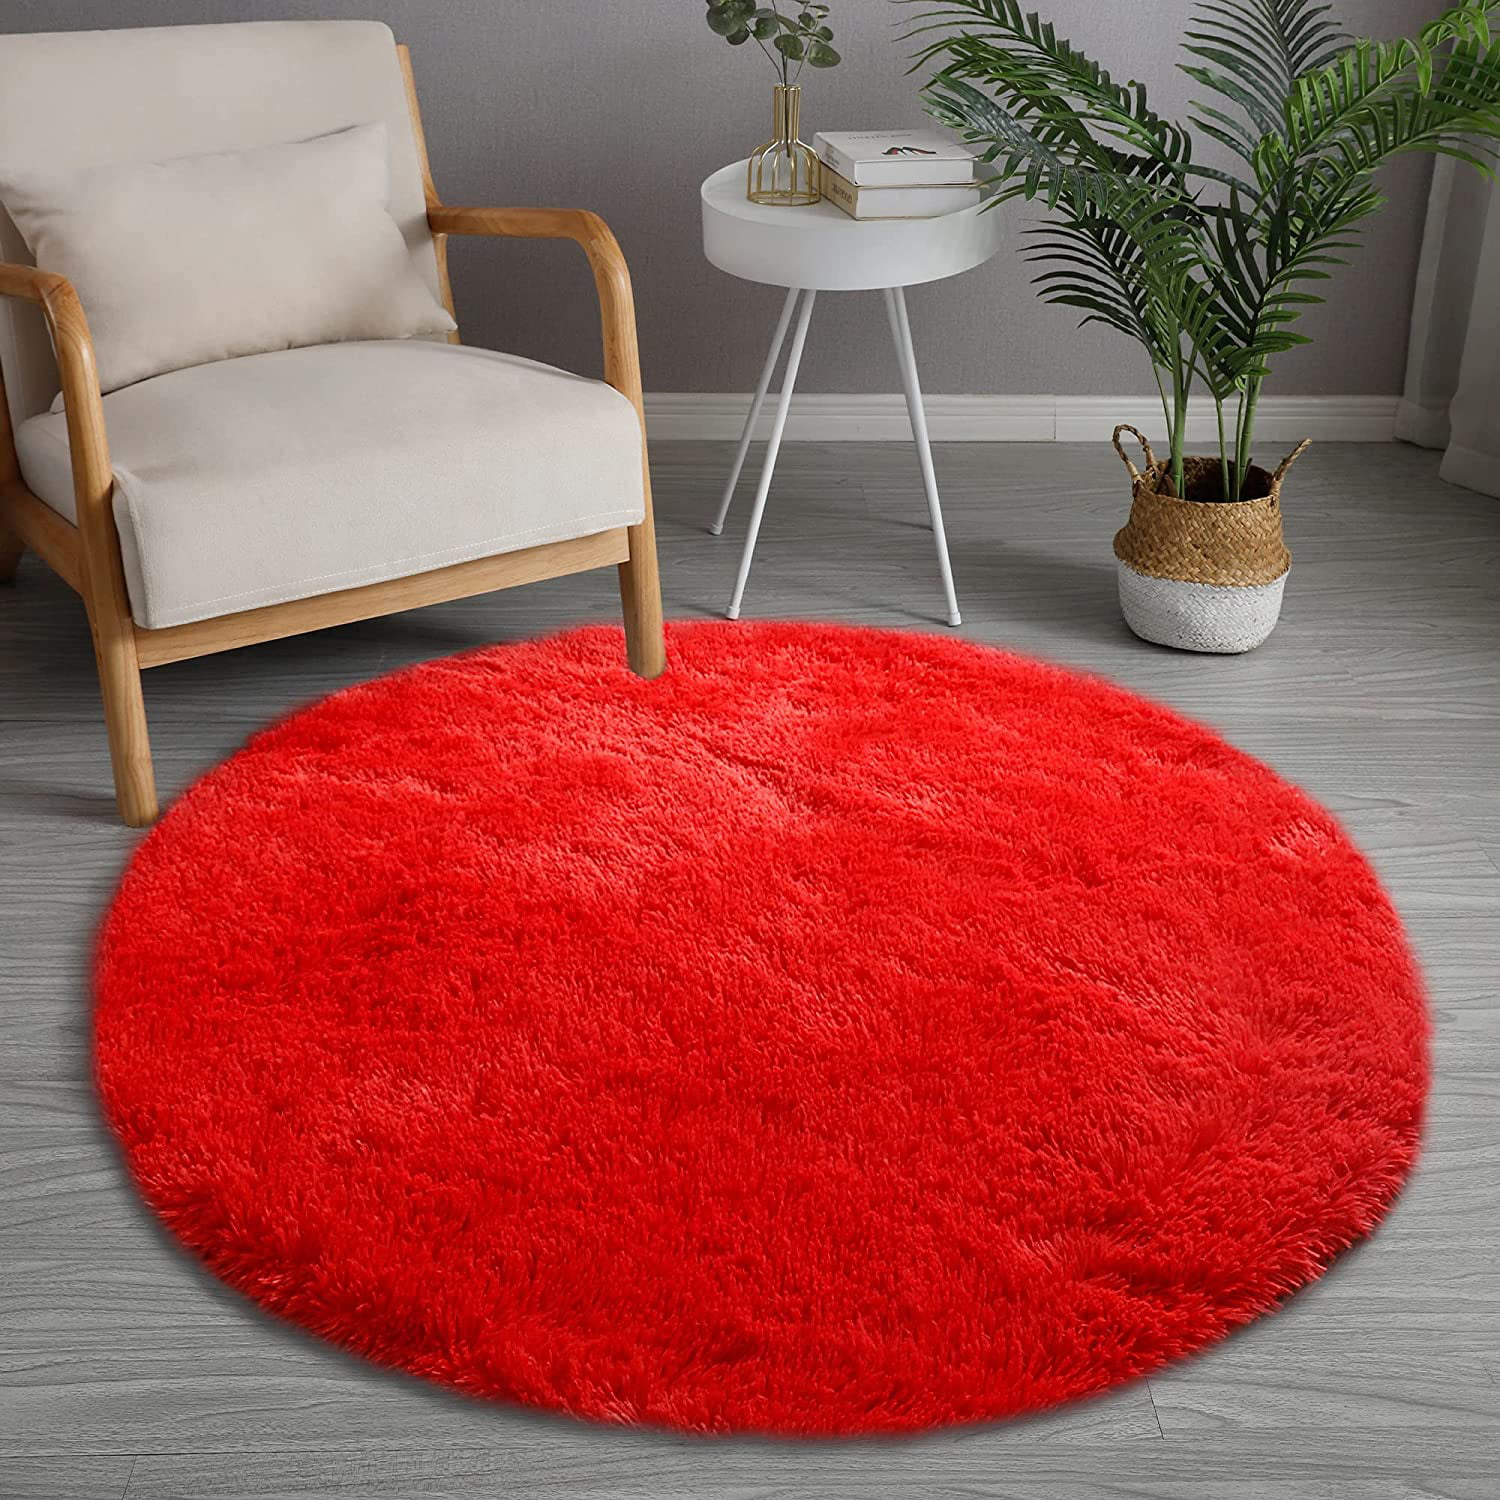 Ultra Soft Area Rug Fluffy 5, Round Red Area Rugs